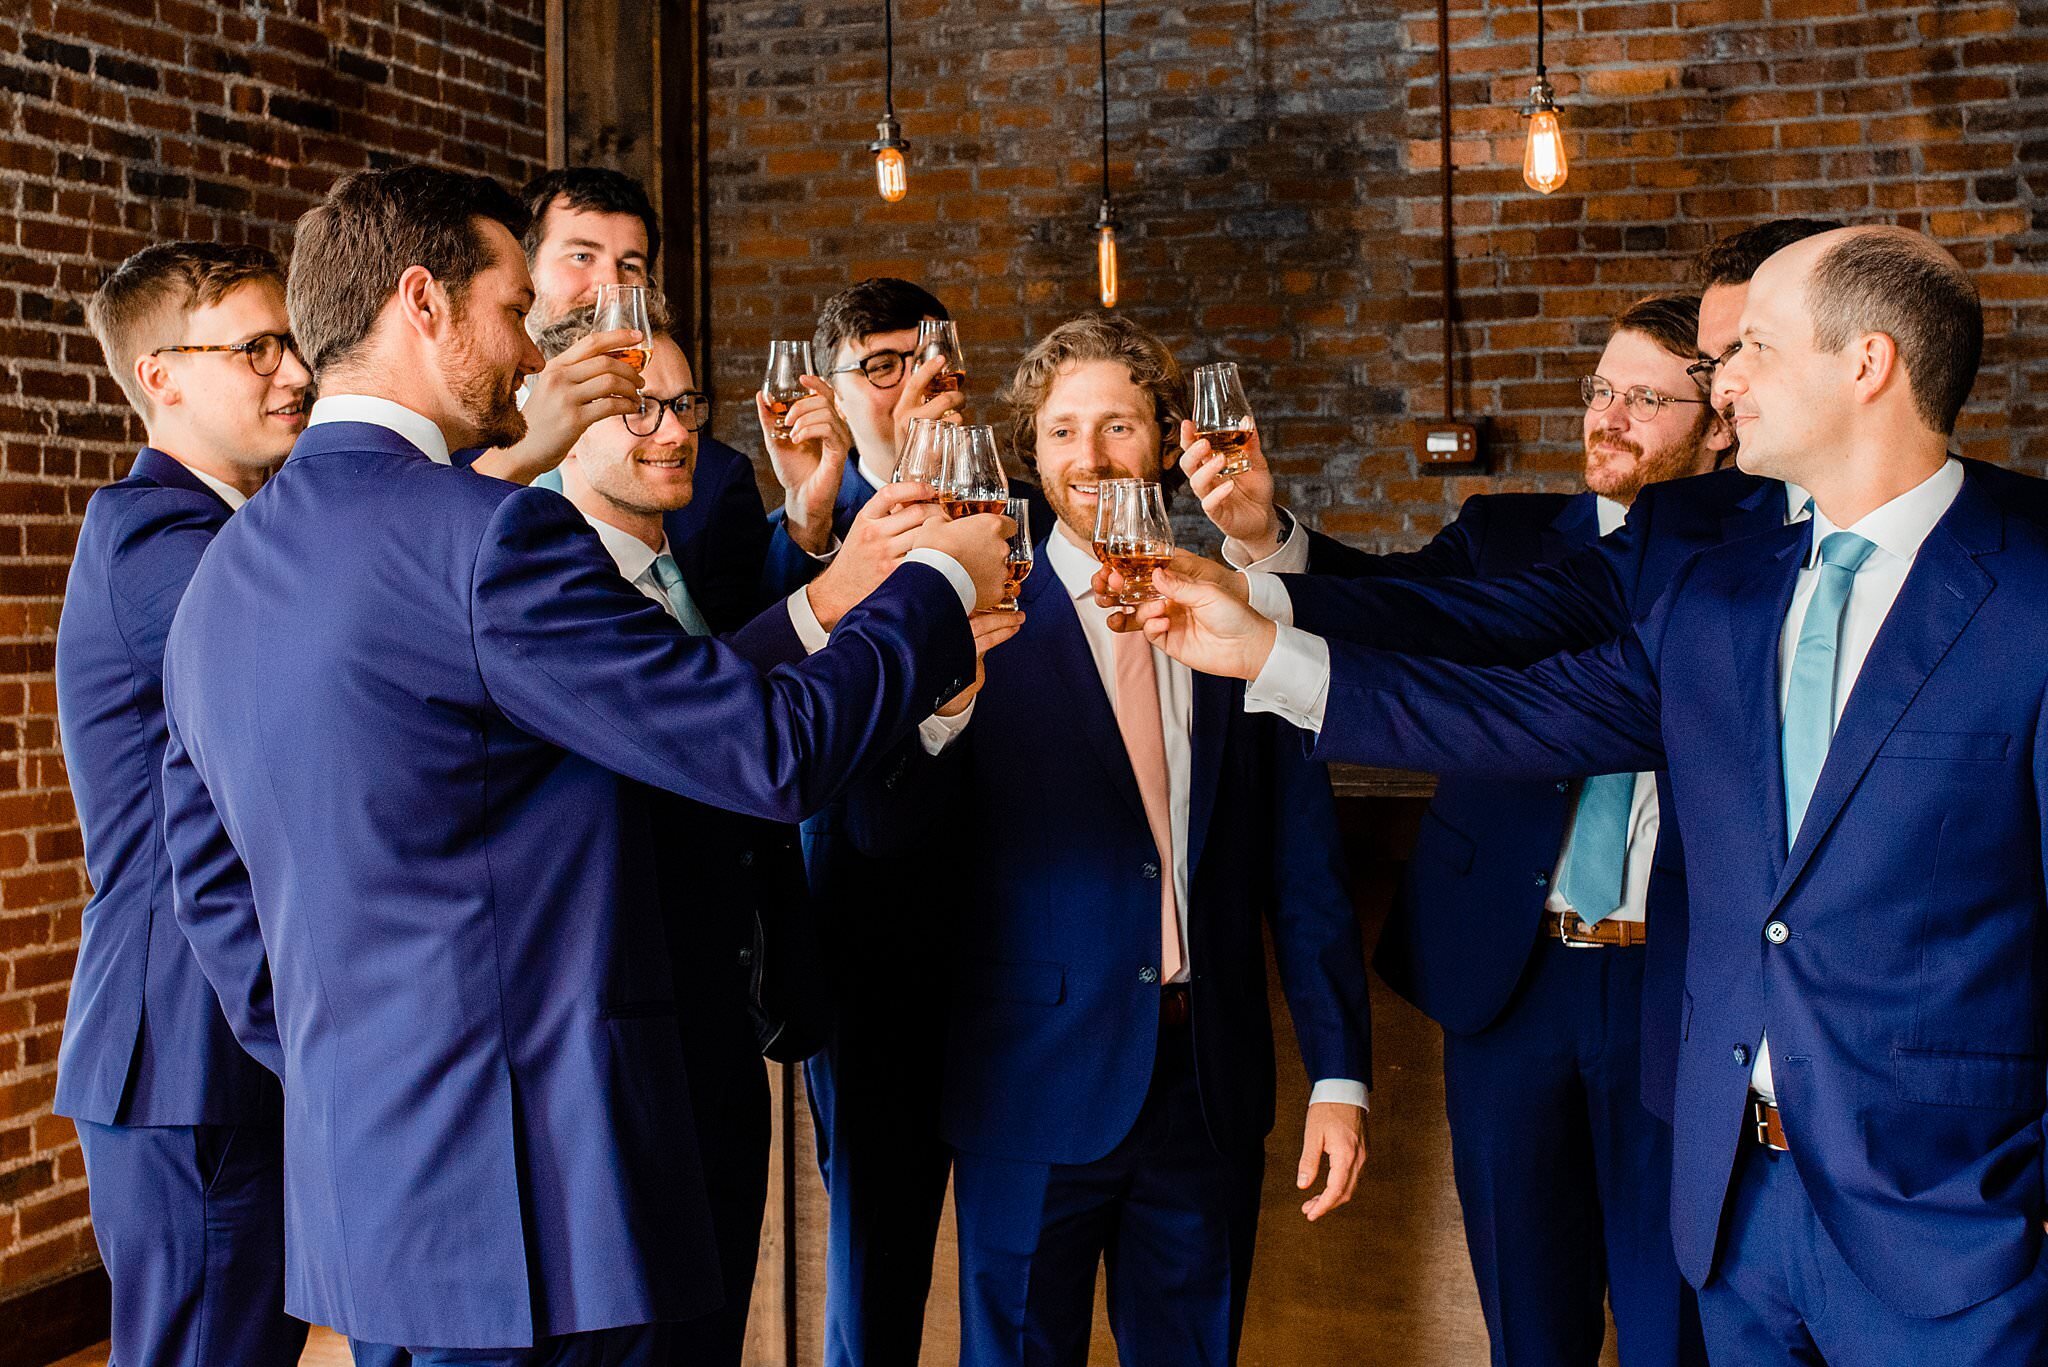 Groom sharing a bourbon toast with his groomsmen in the Cannery ONE bar before the ceremony